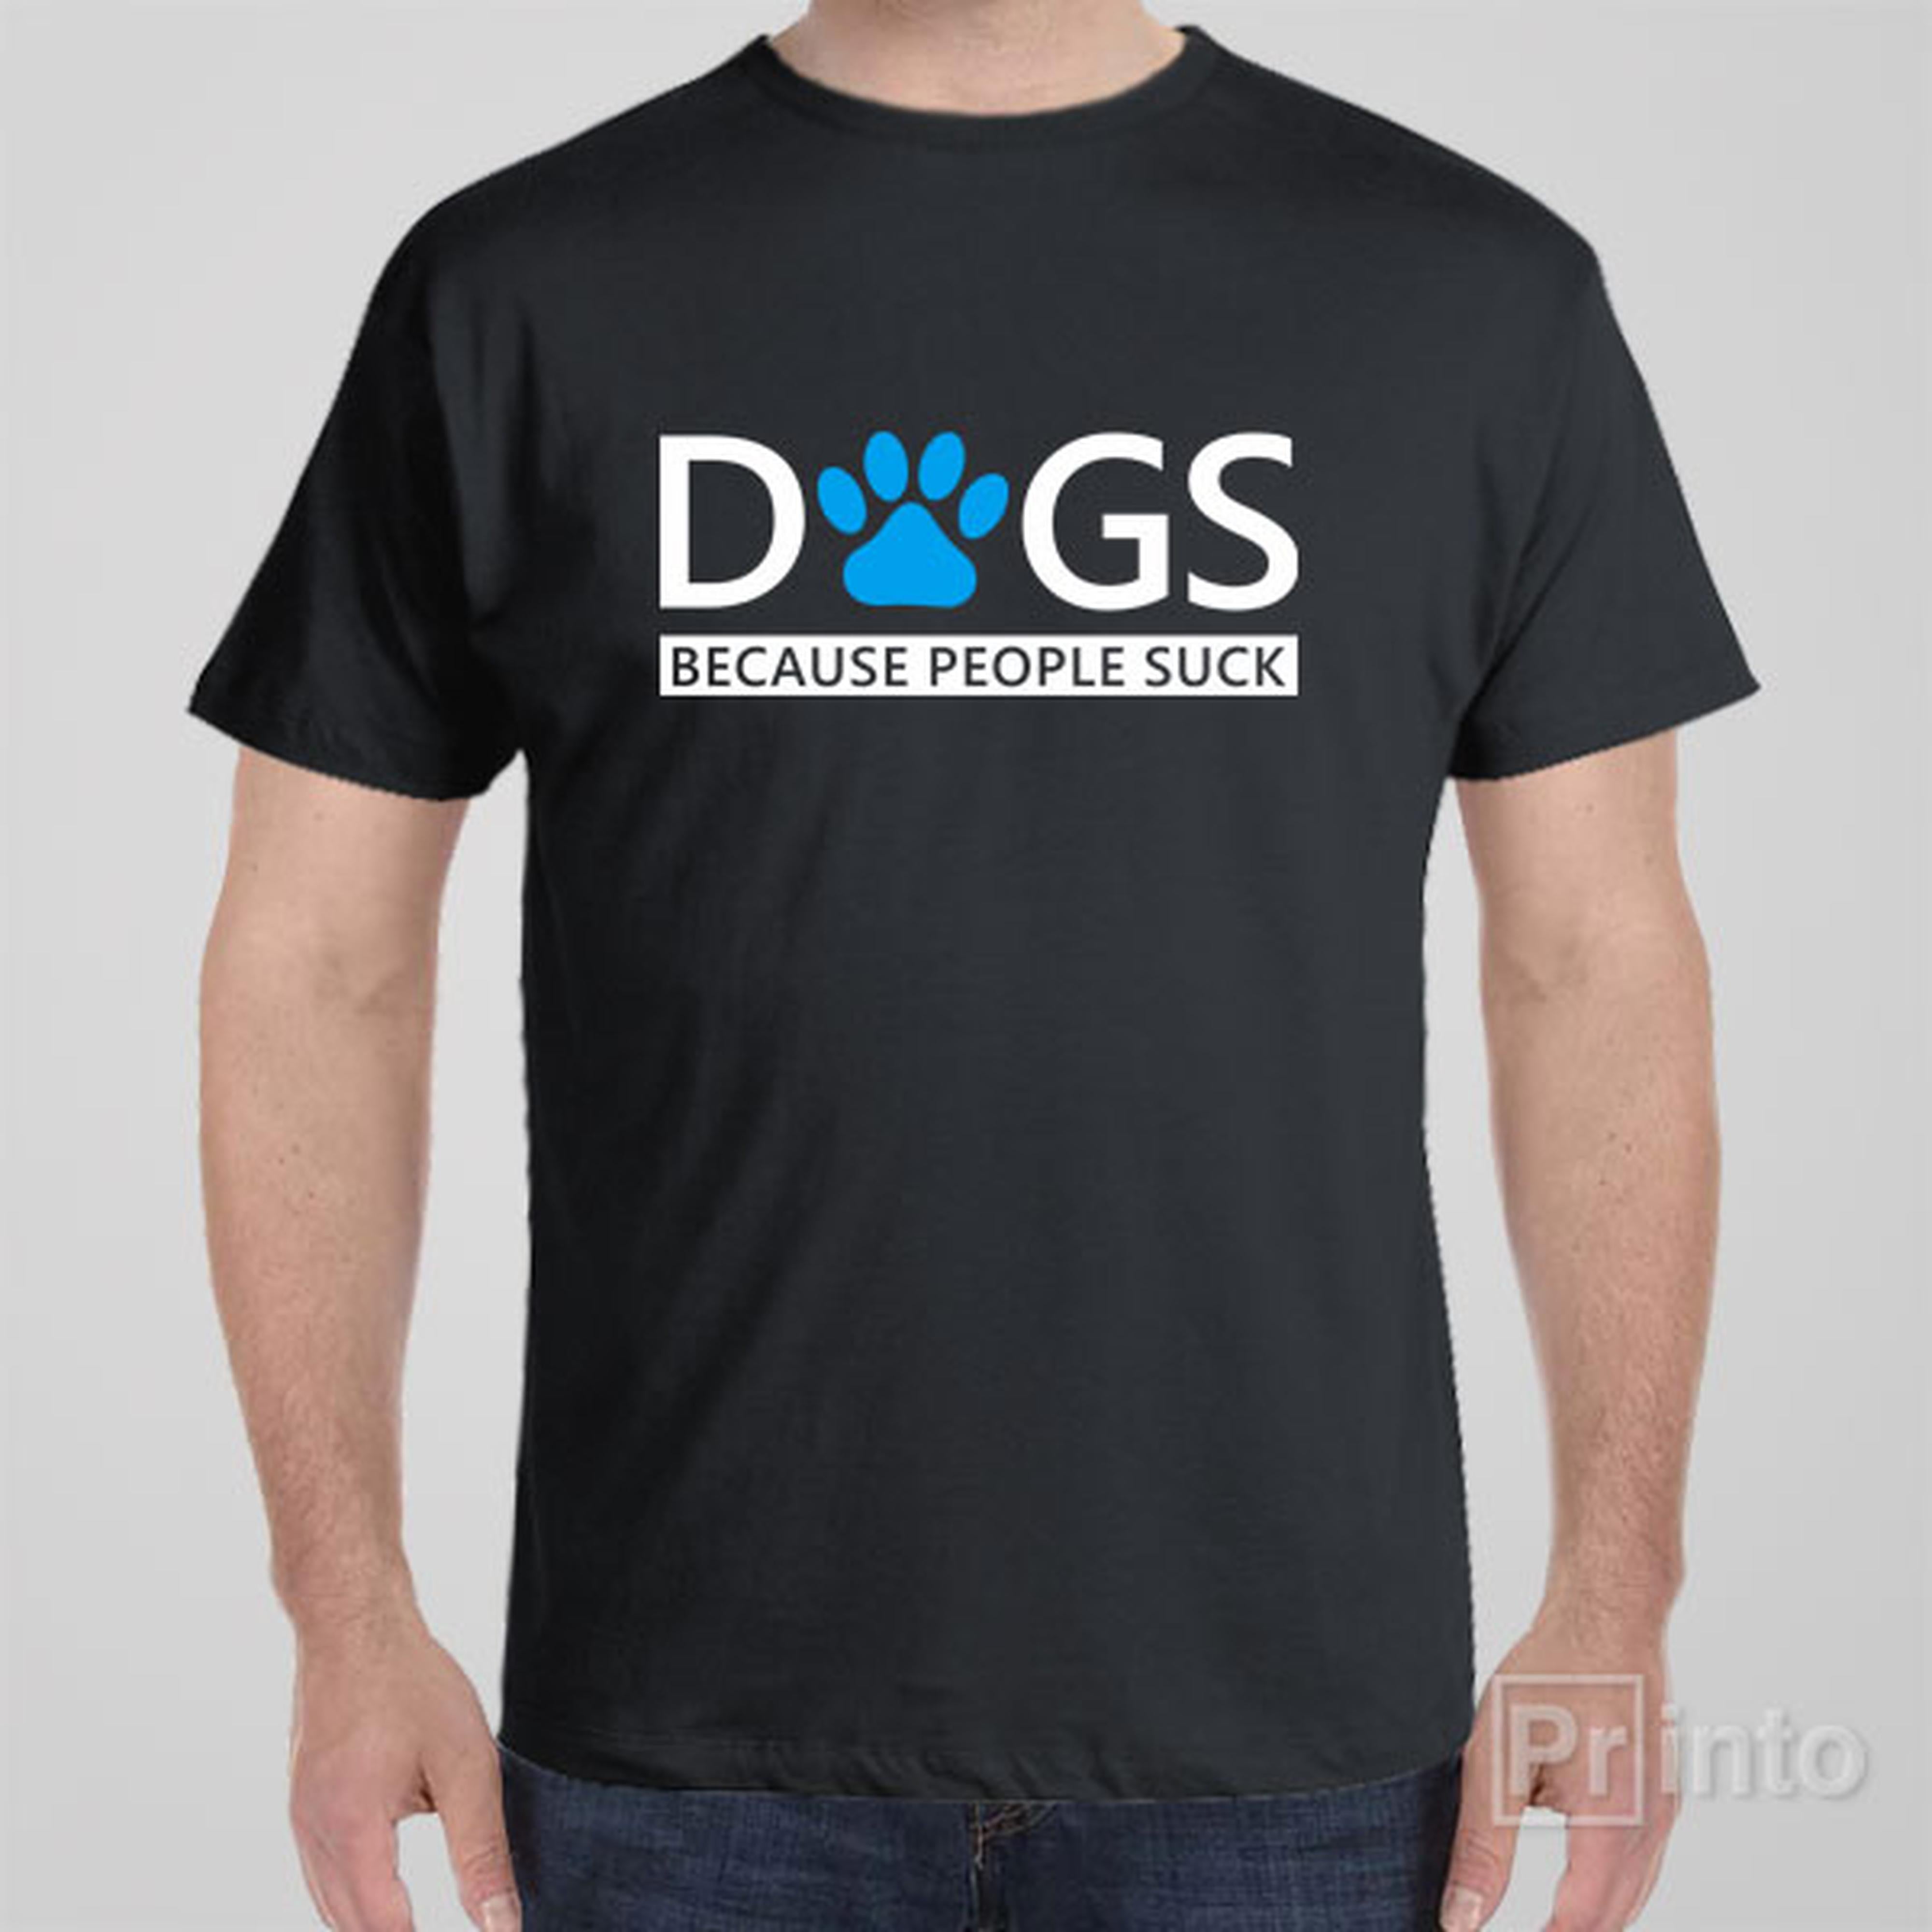 dogs-because-people-suck-t-shirt